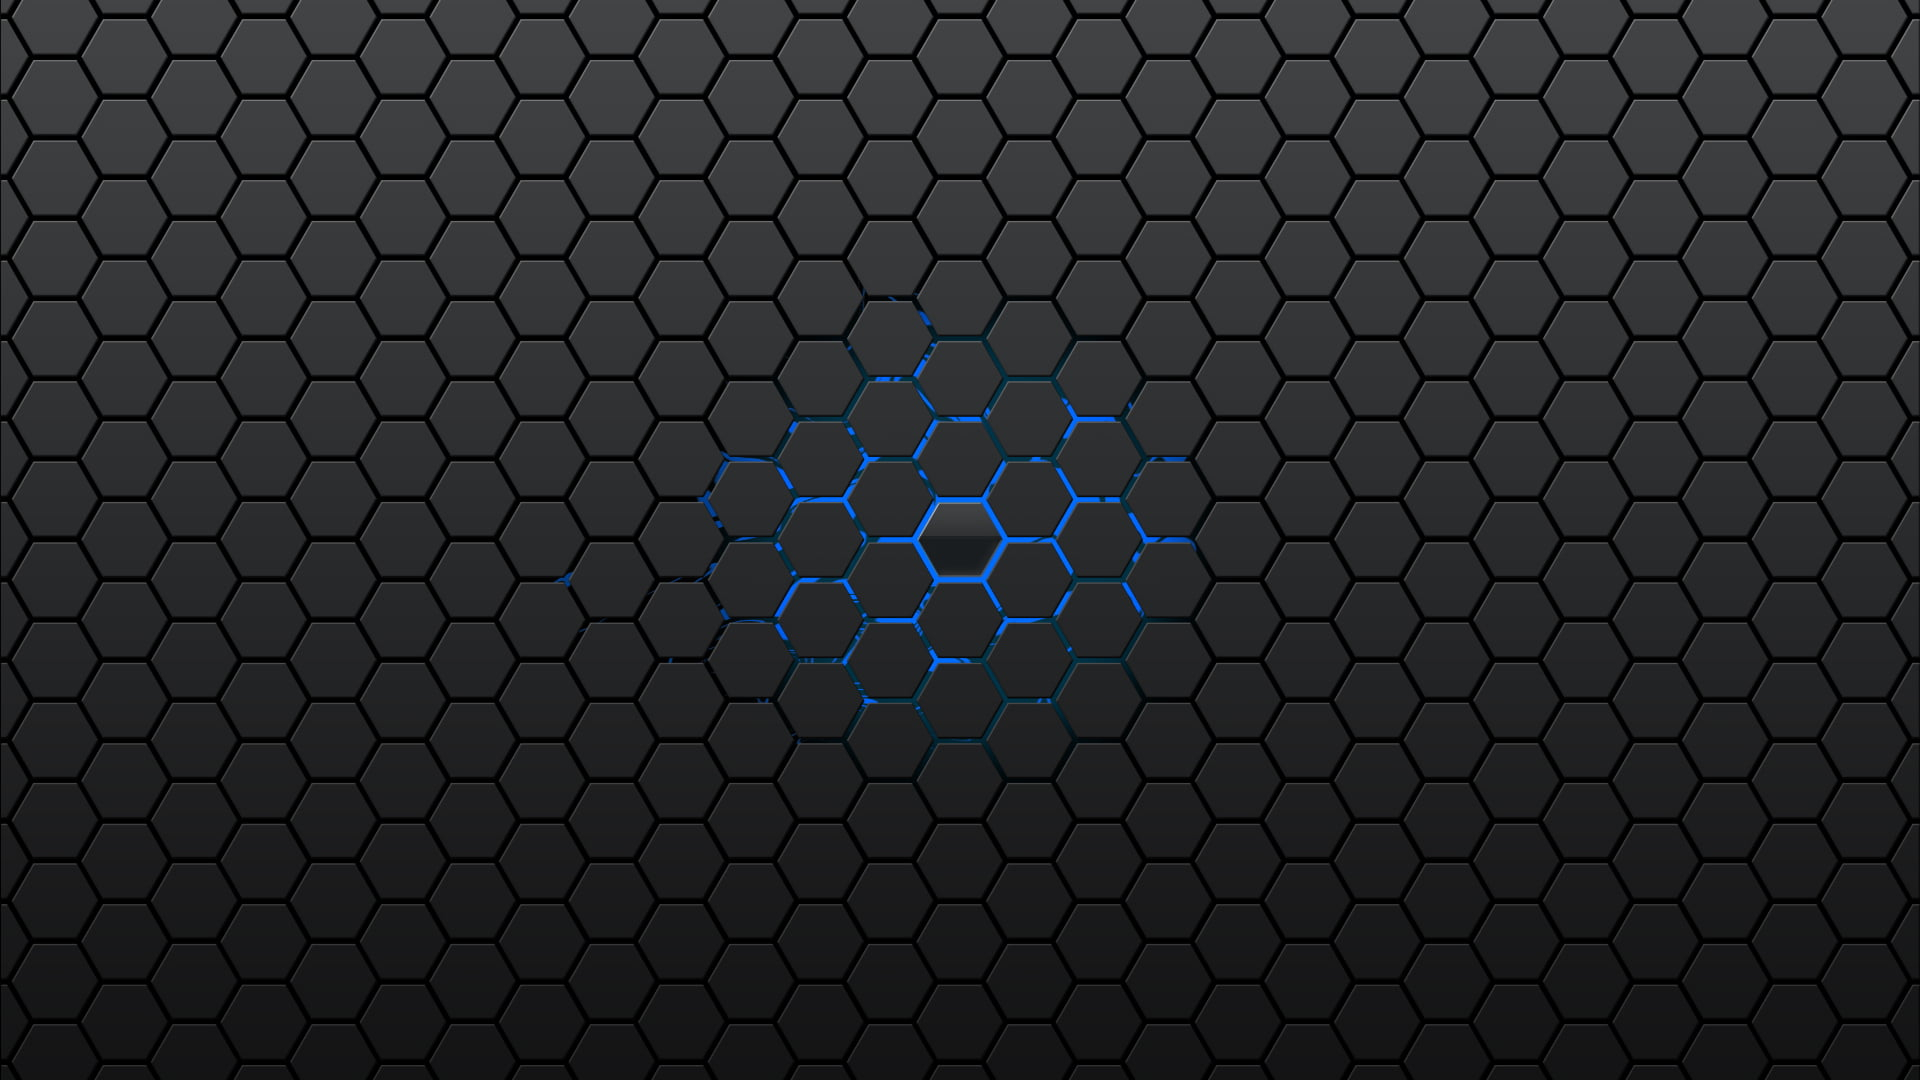 Black and blue abstract wallpaper, gray and blue honeycomb graphic